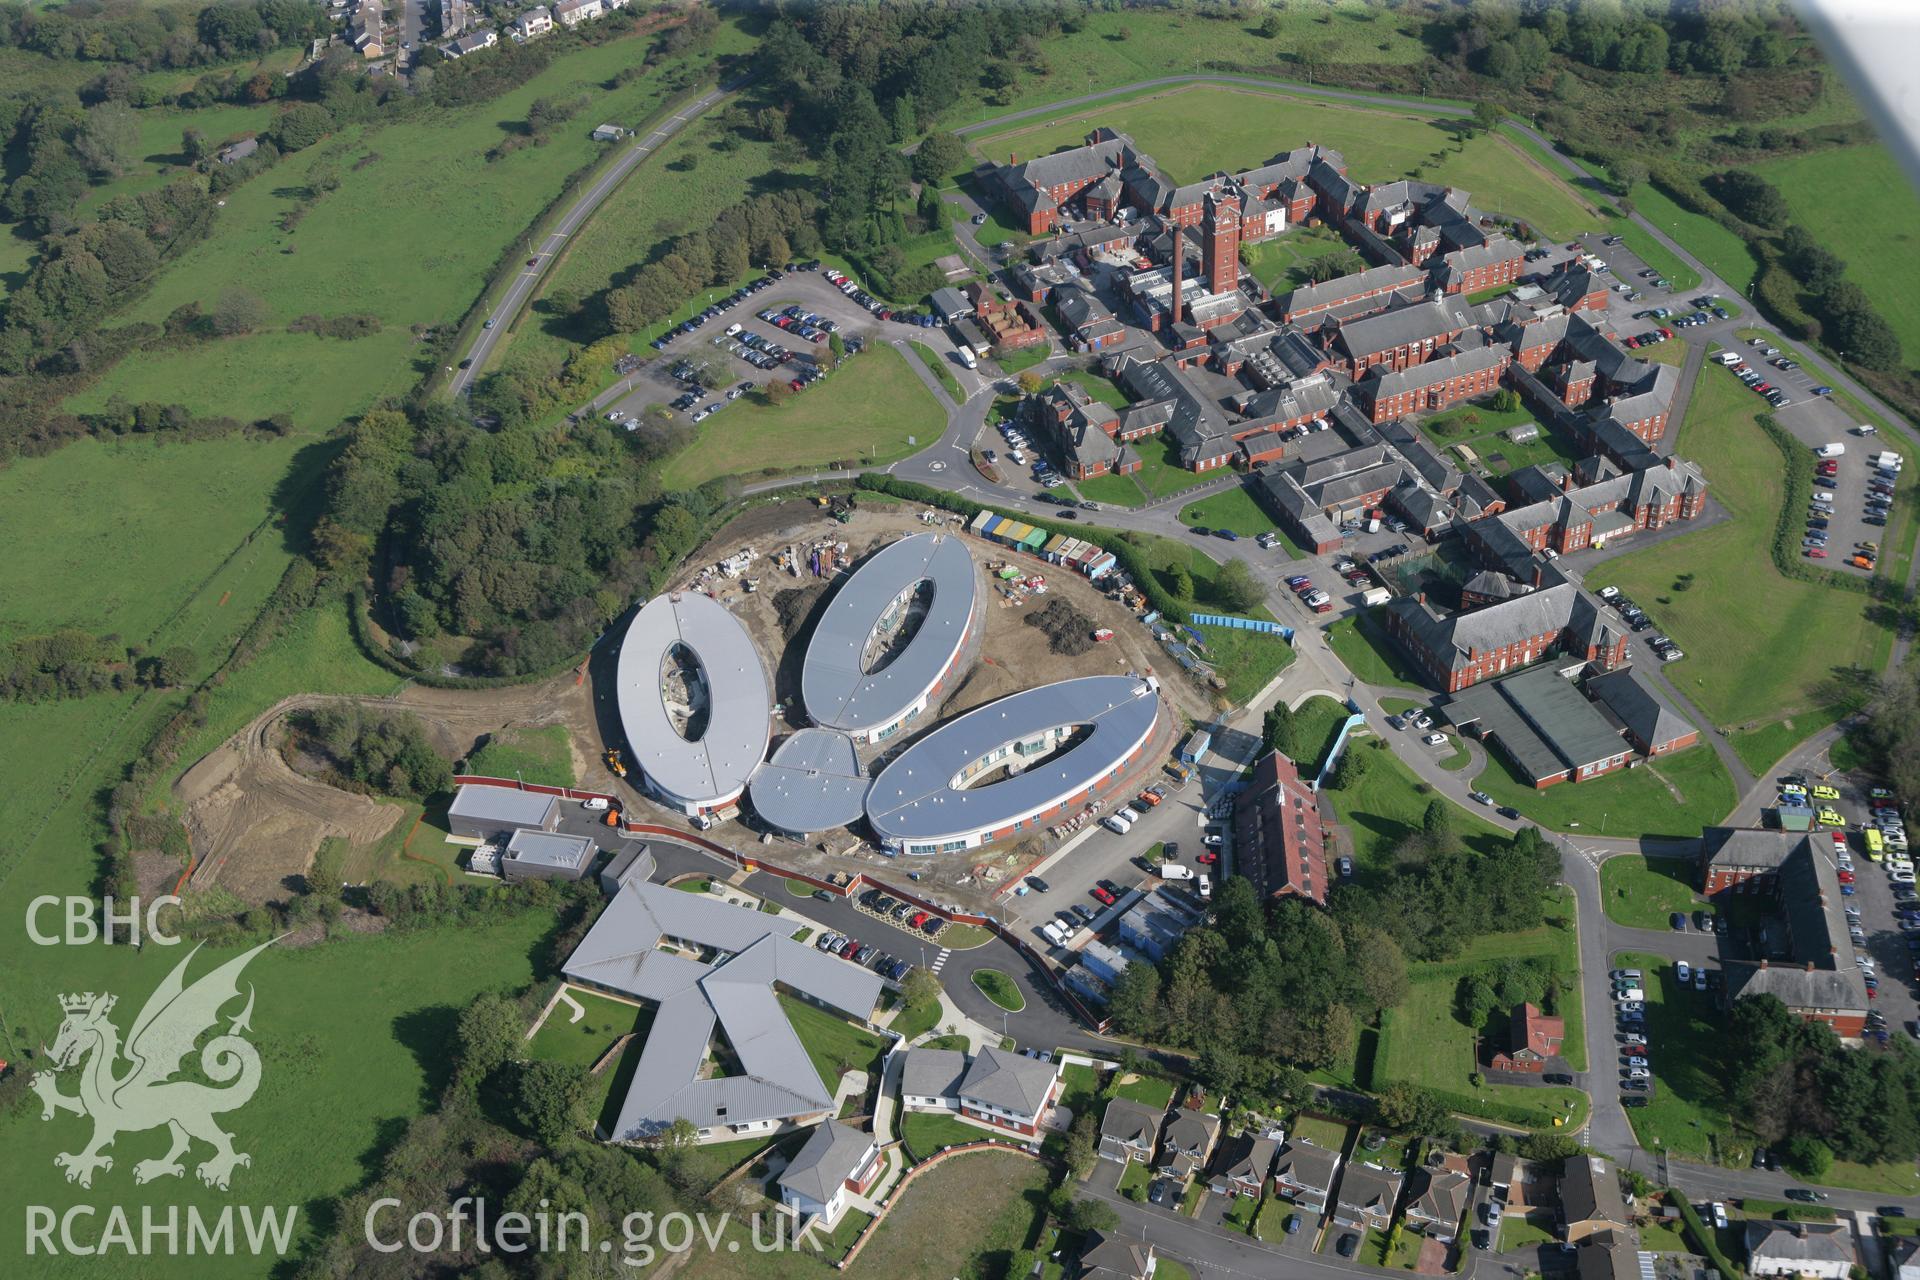 RCAHMW colour oblique photograph of Cefn Coed Hospital with new dementia unit. Taken by Toby Driver and Oliver Davies on 28/09/2011.